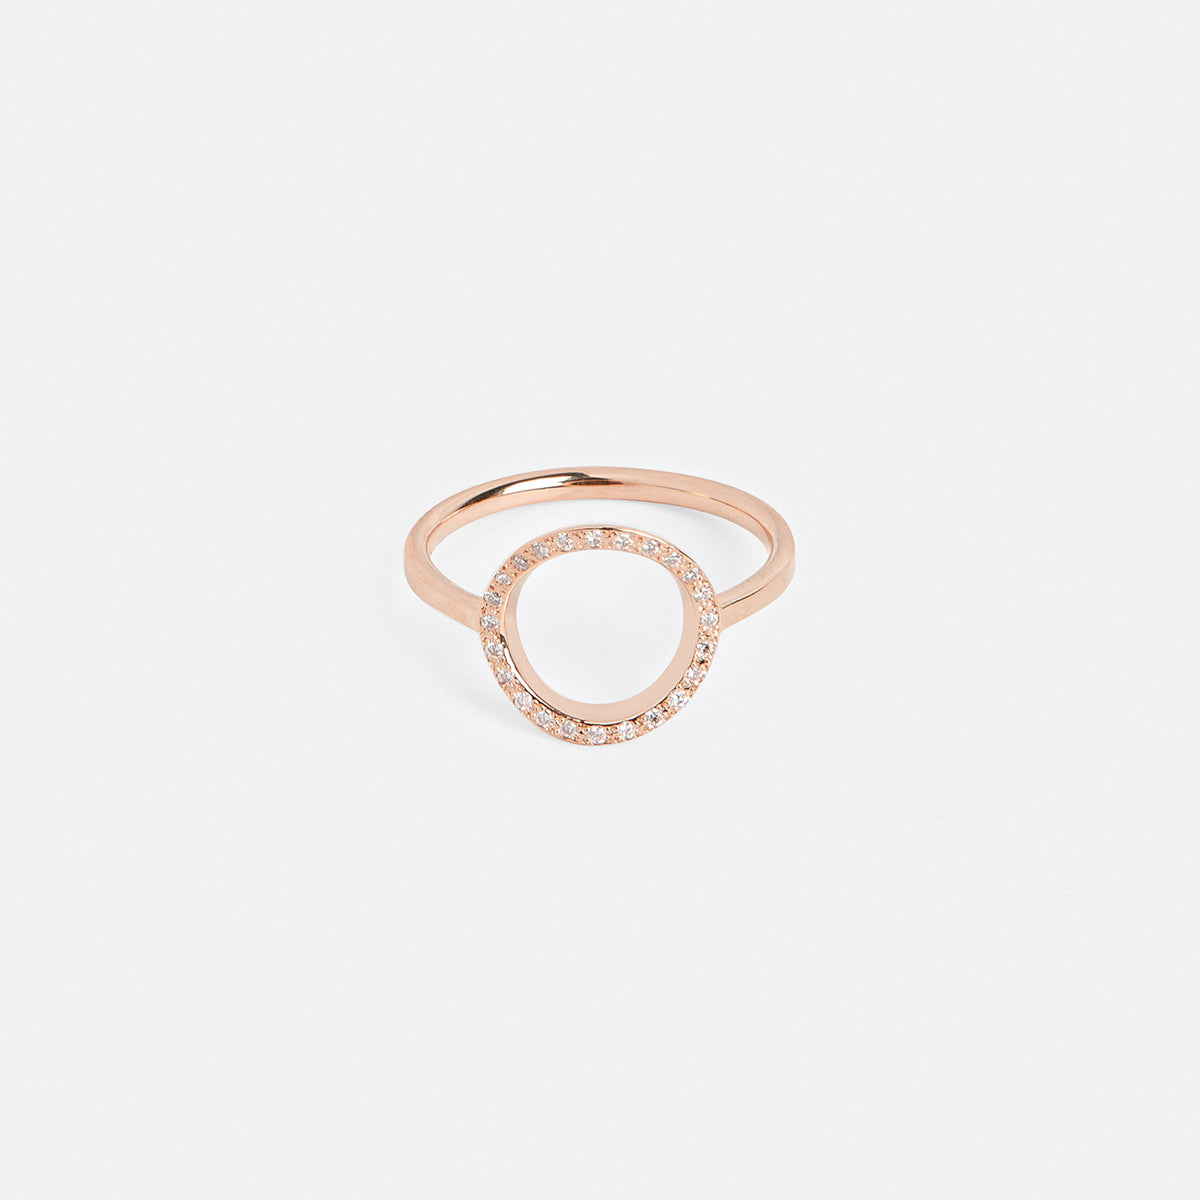 Nida Alternative Ring in 14k Rose Gold set with White Diamonds by SHW Fine Jewelry